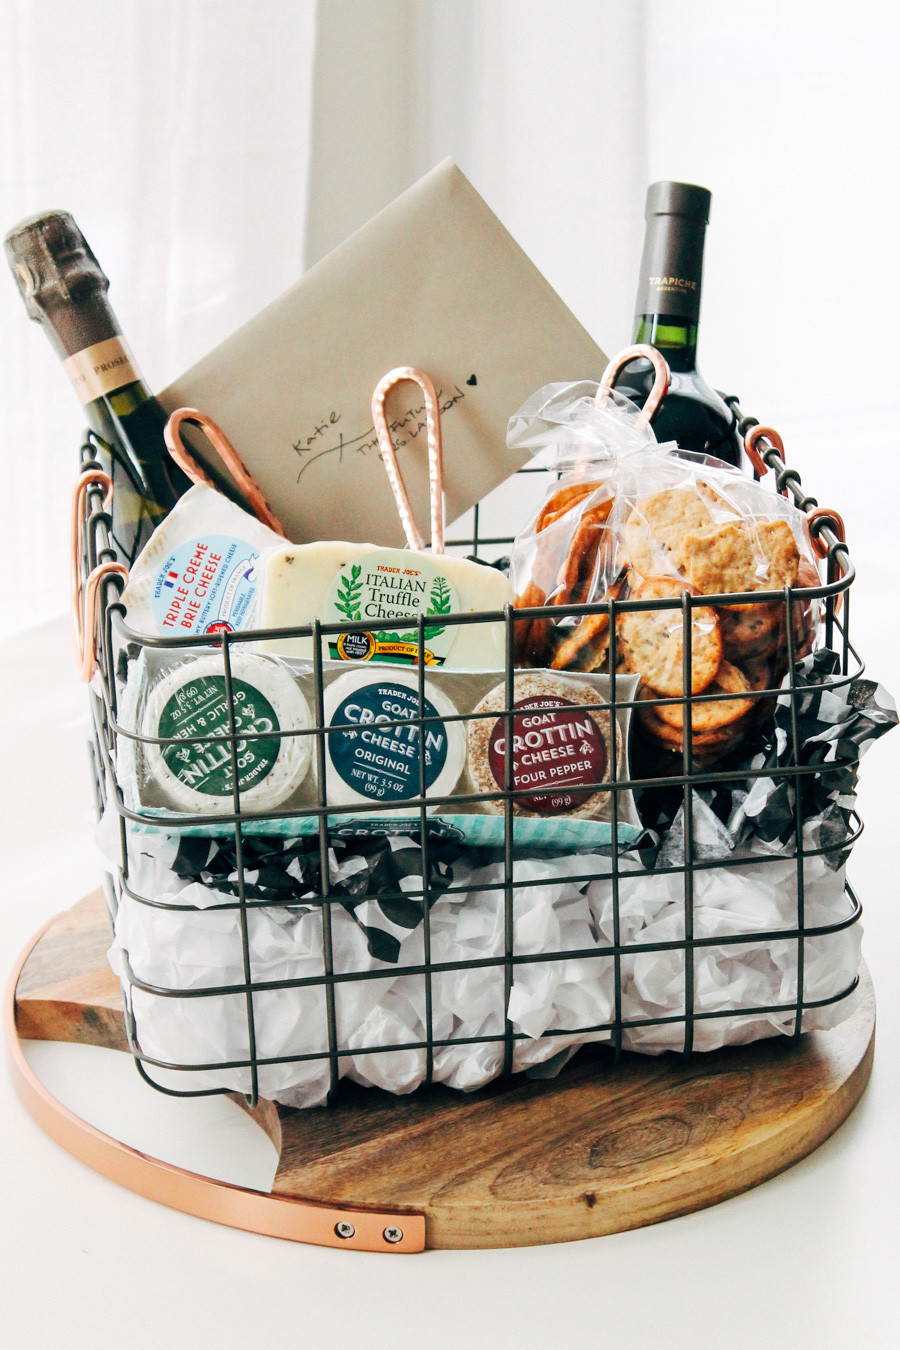 Wine Basket Gift Ideas
 the ultimate cheese t basket playswellwithbutter